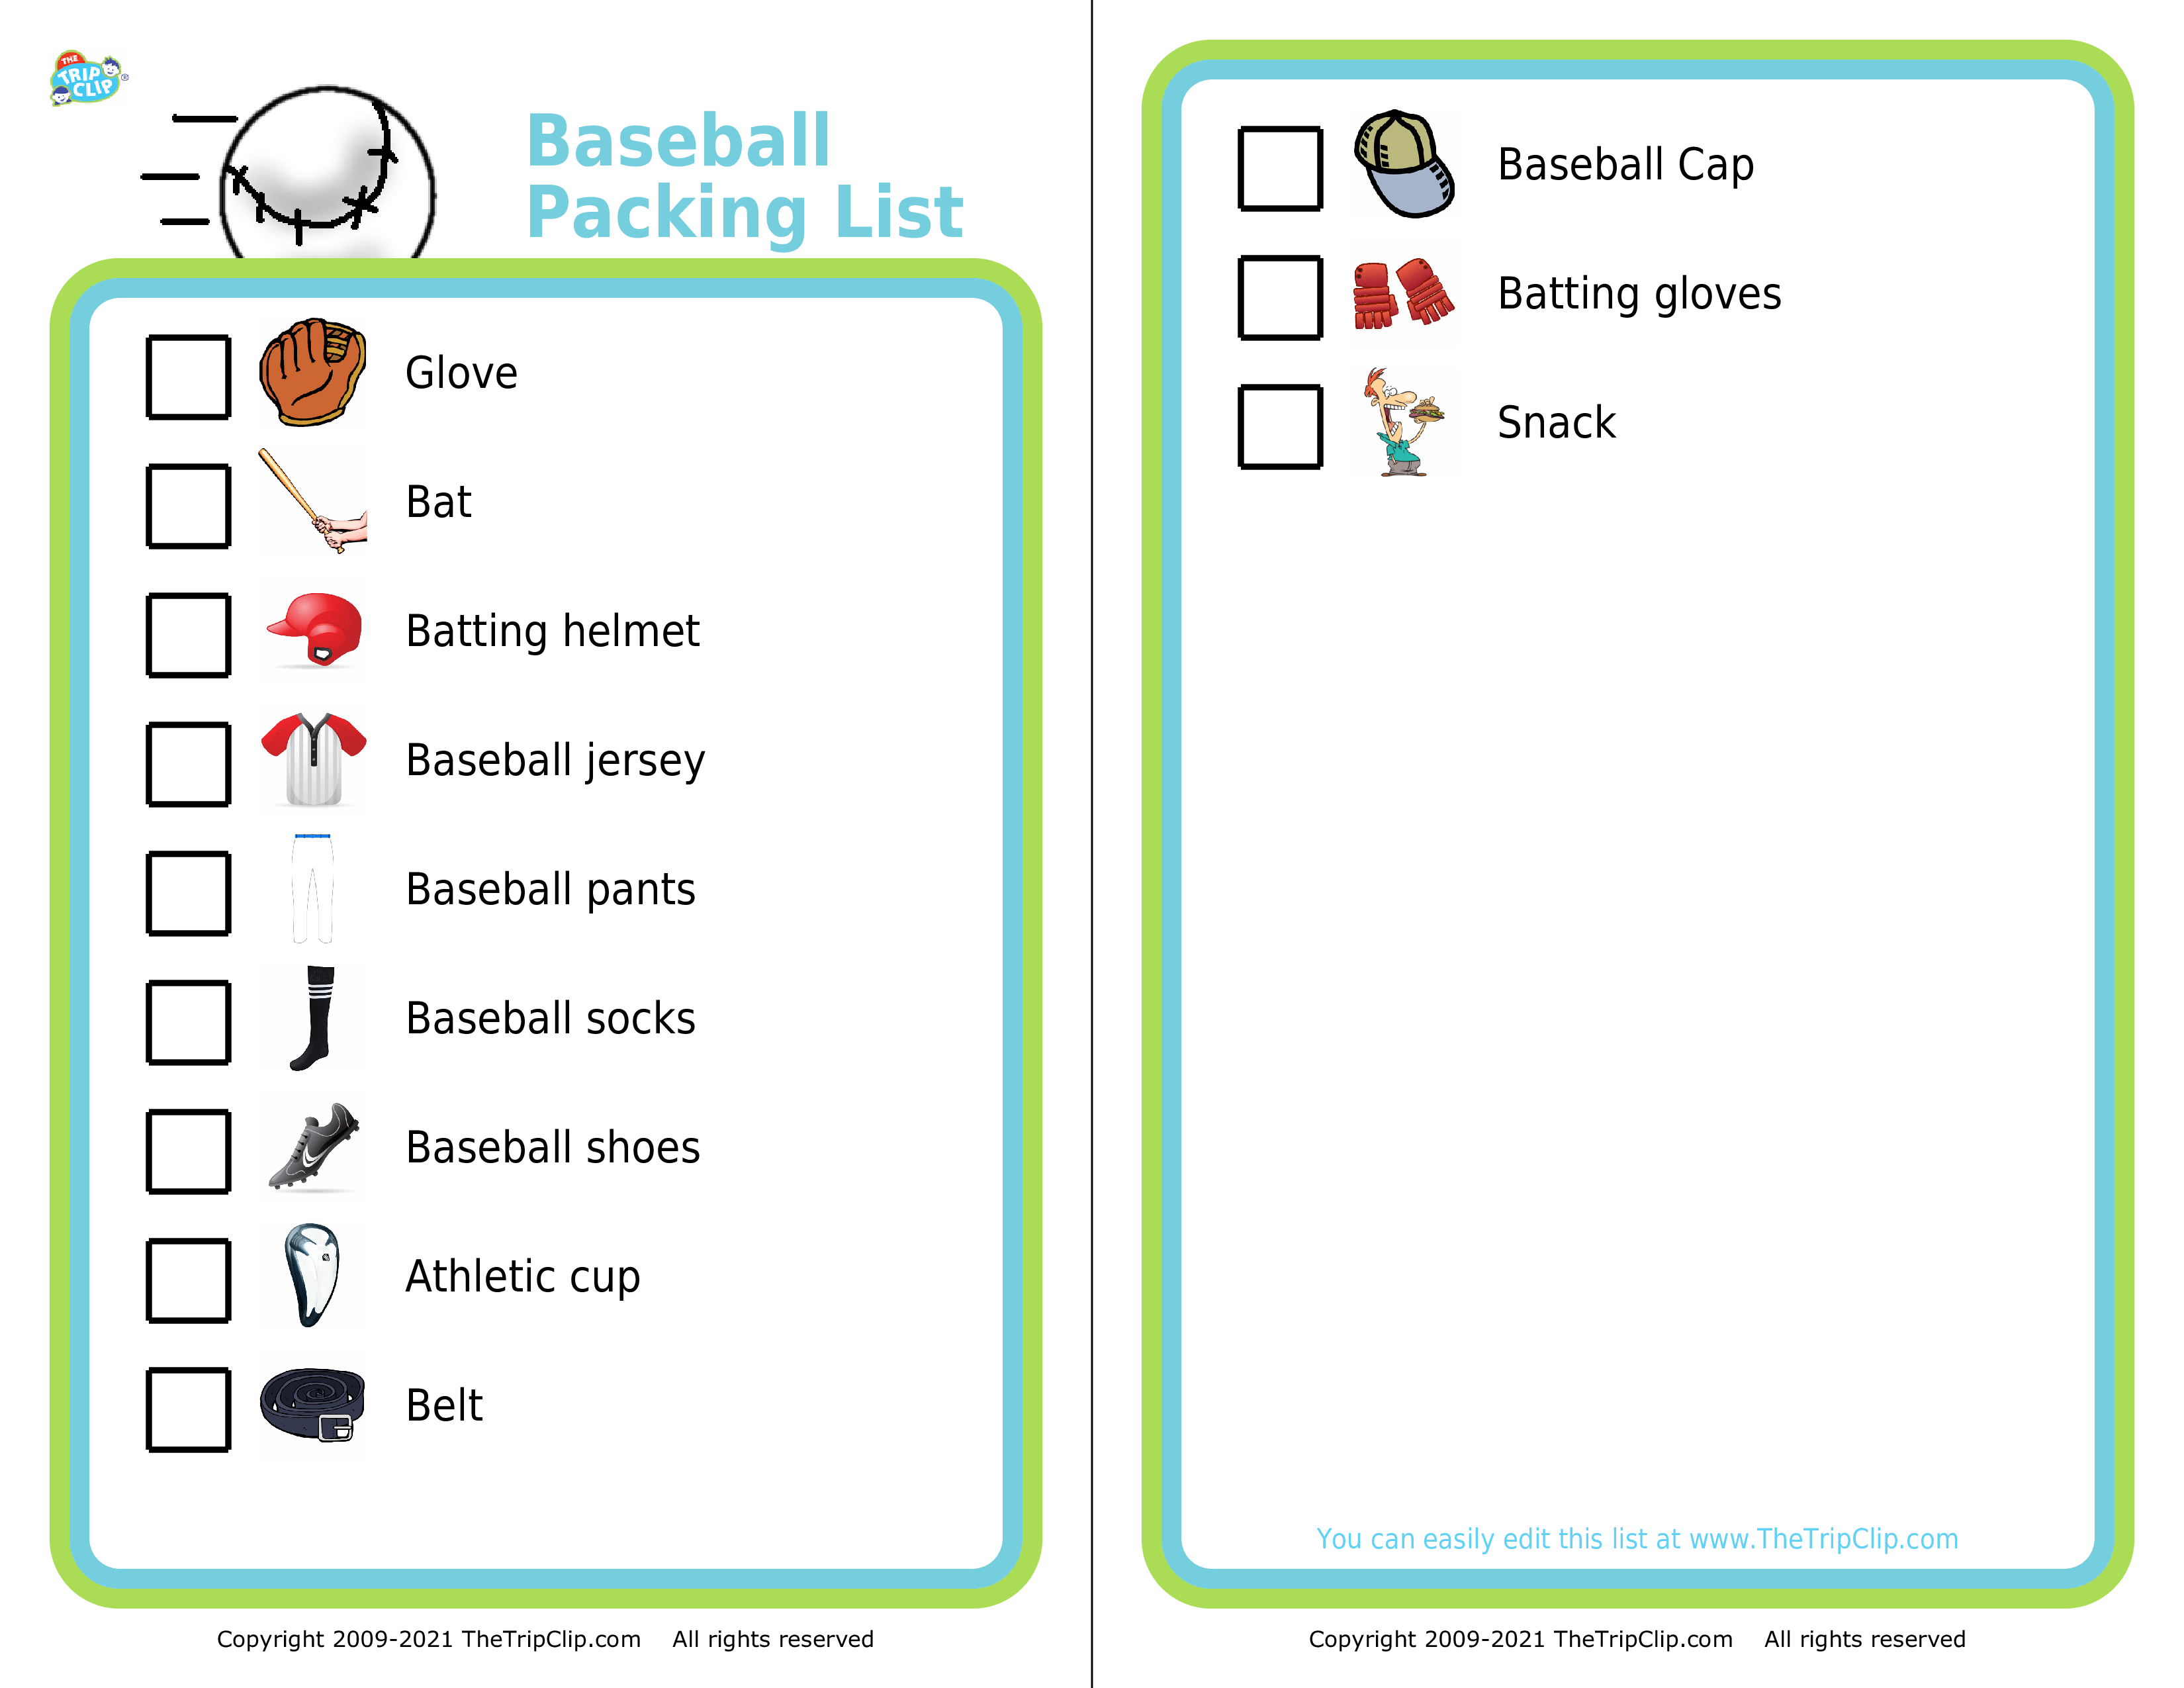 Picture checklist for making baseball packing list